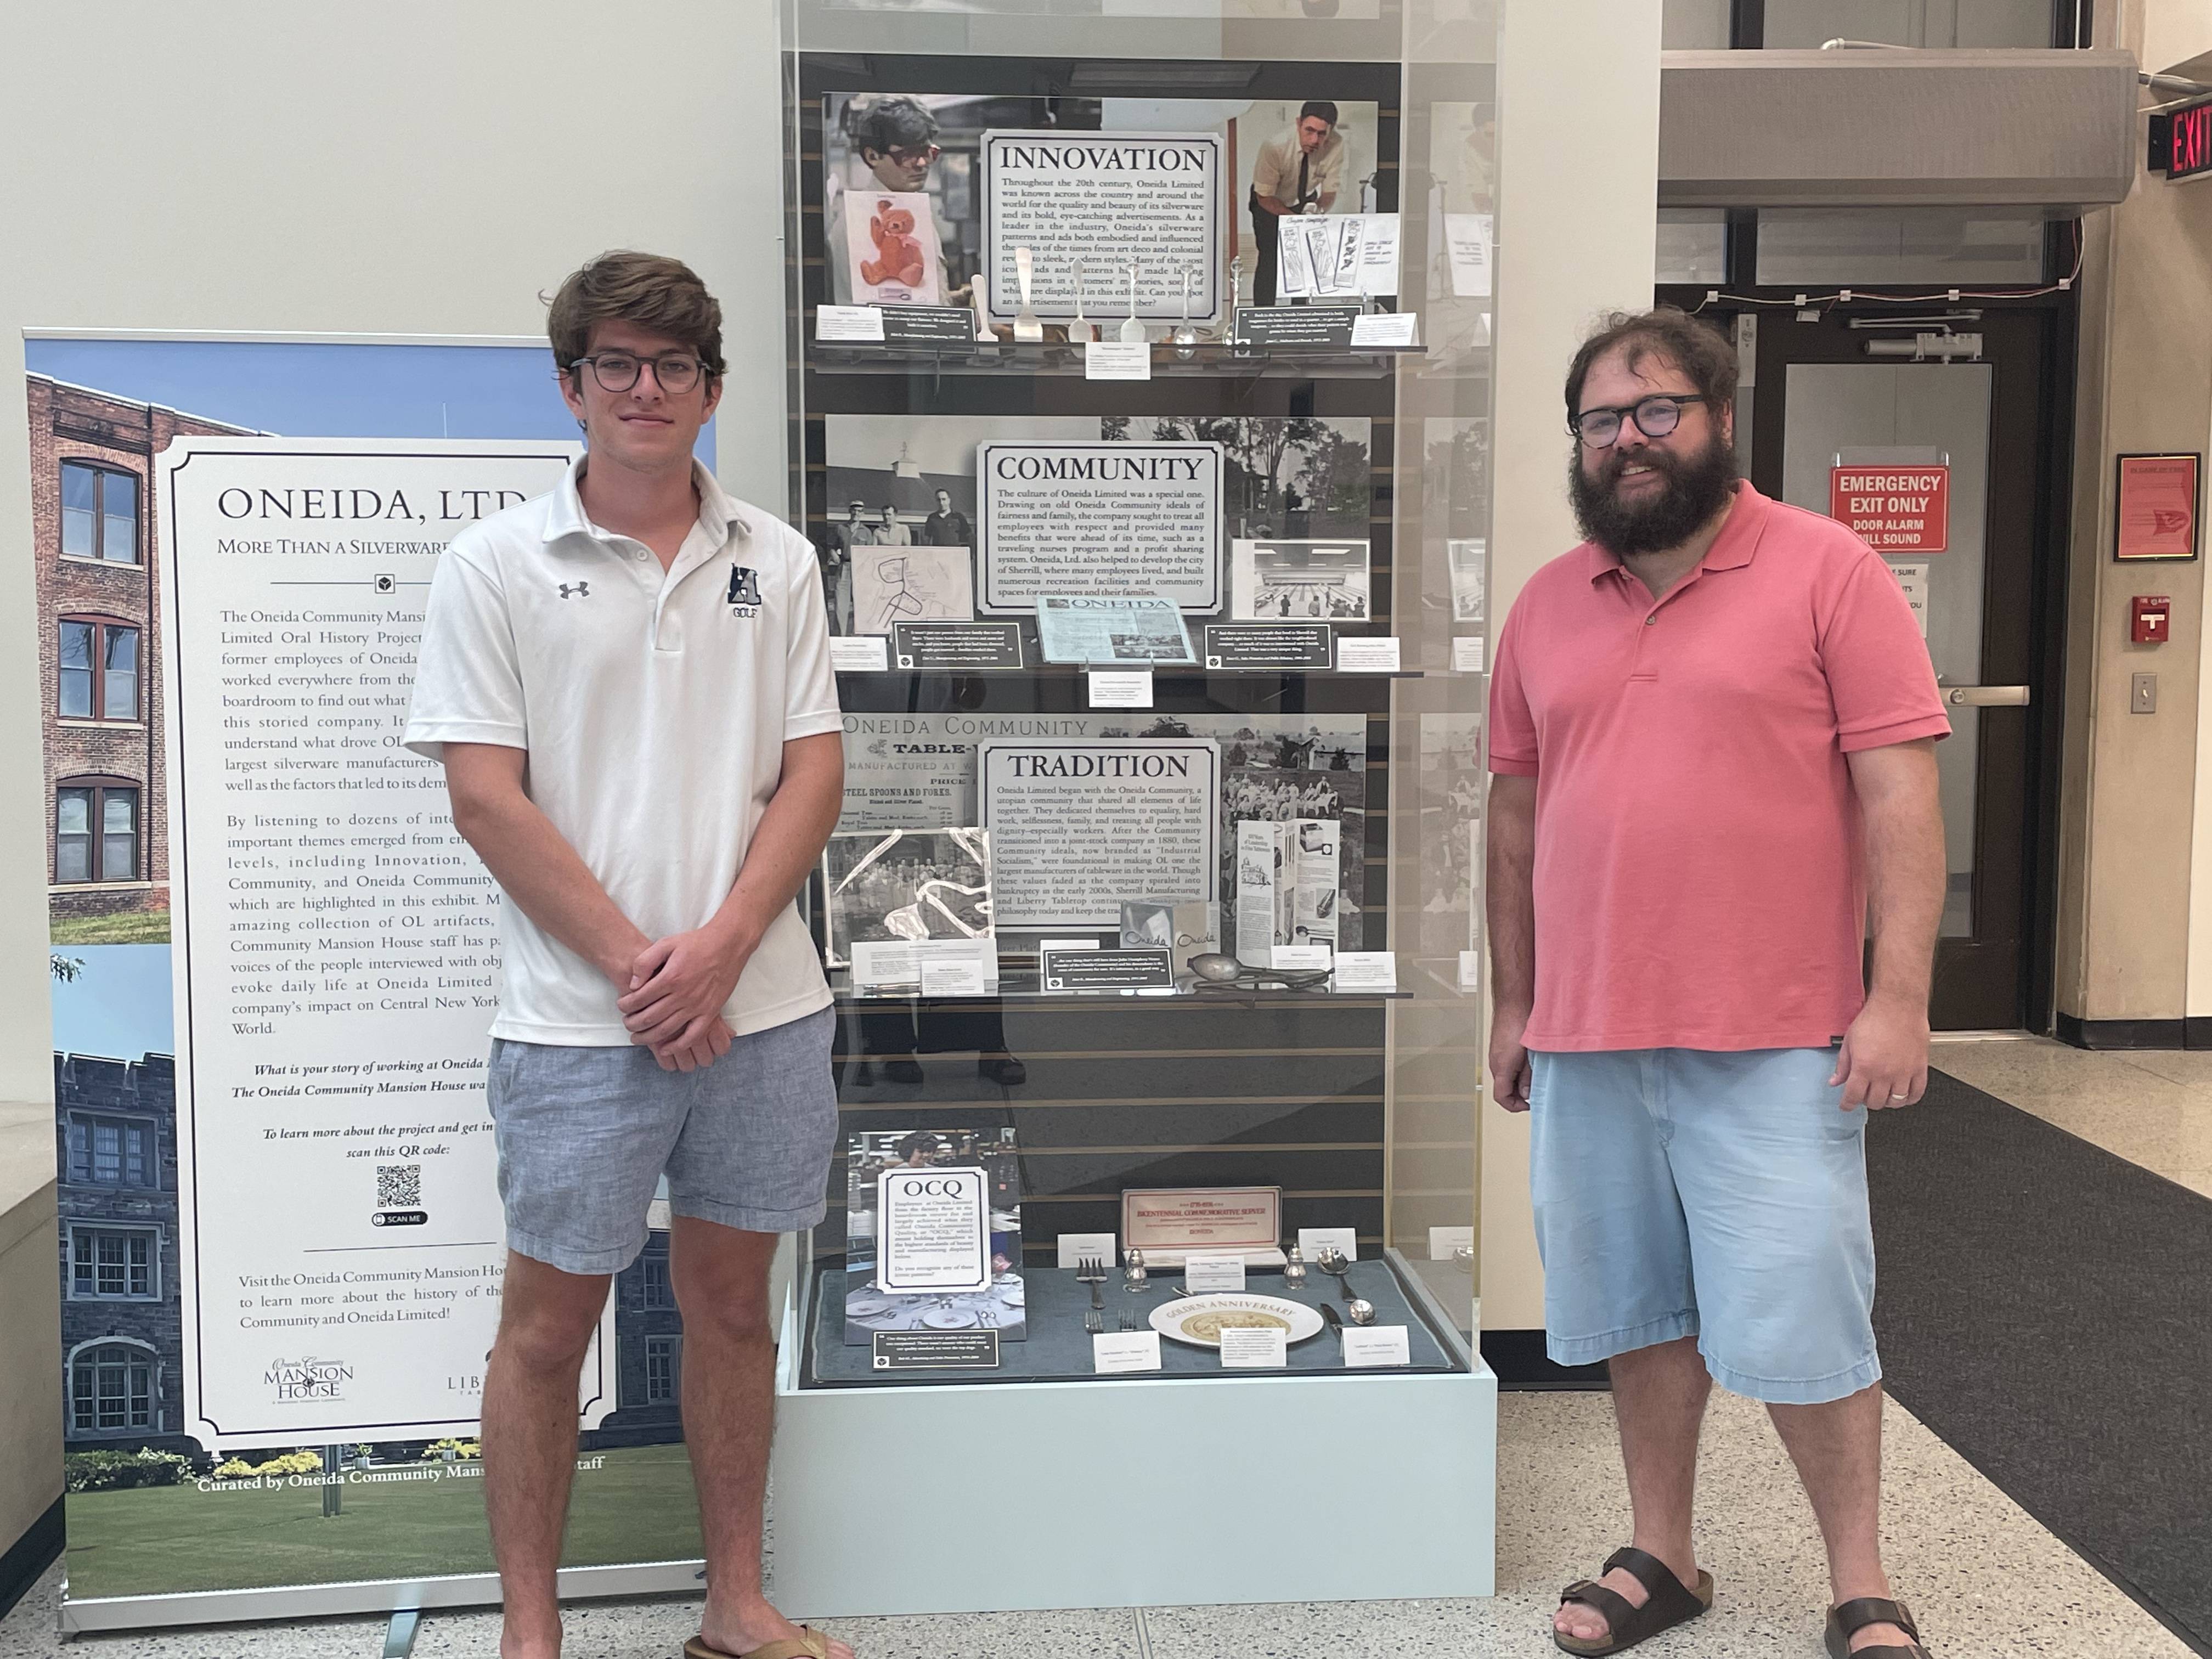 Stuart Sopko '24 and Tom Guiler of the Oneida Mansion House stand by finished installation of exhibit entitled "Oneida, Ltd.: More than a Silverware Company" at the Madison County Courthouse.